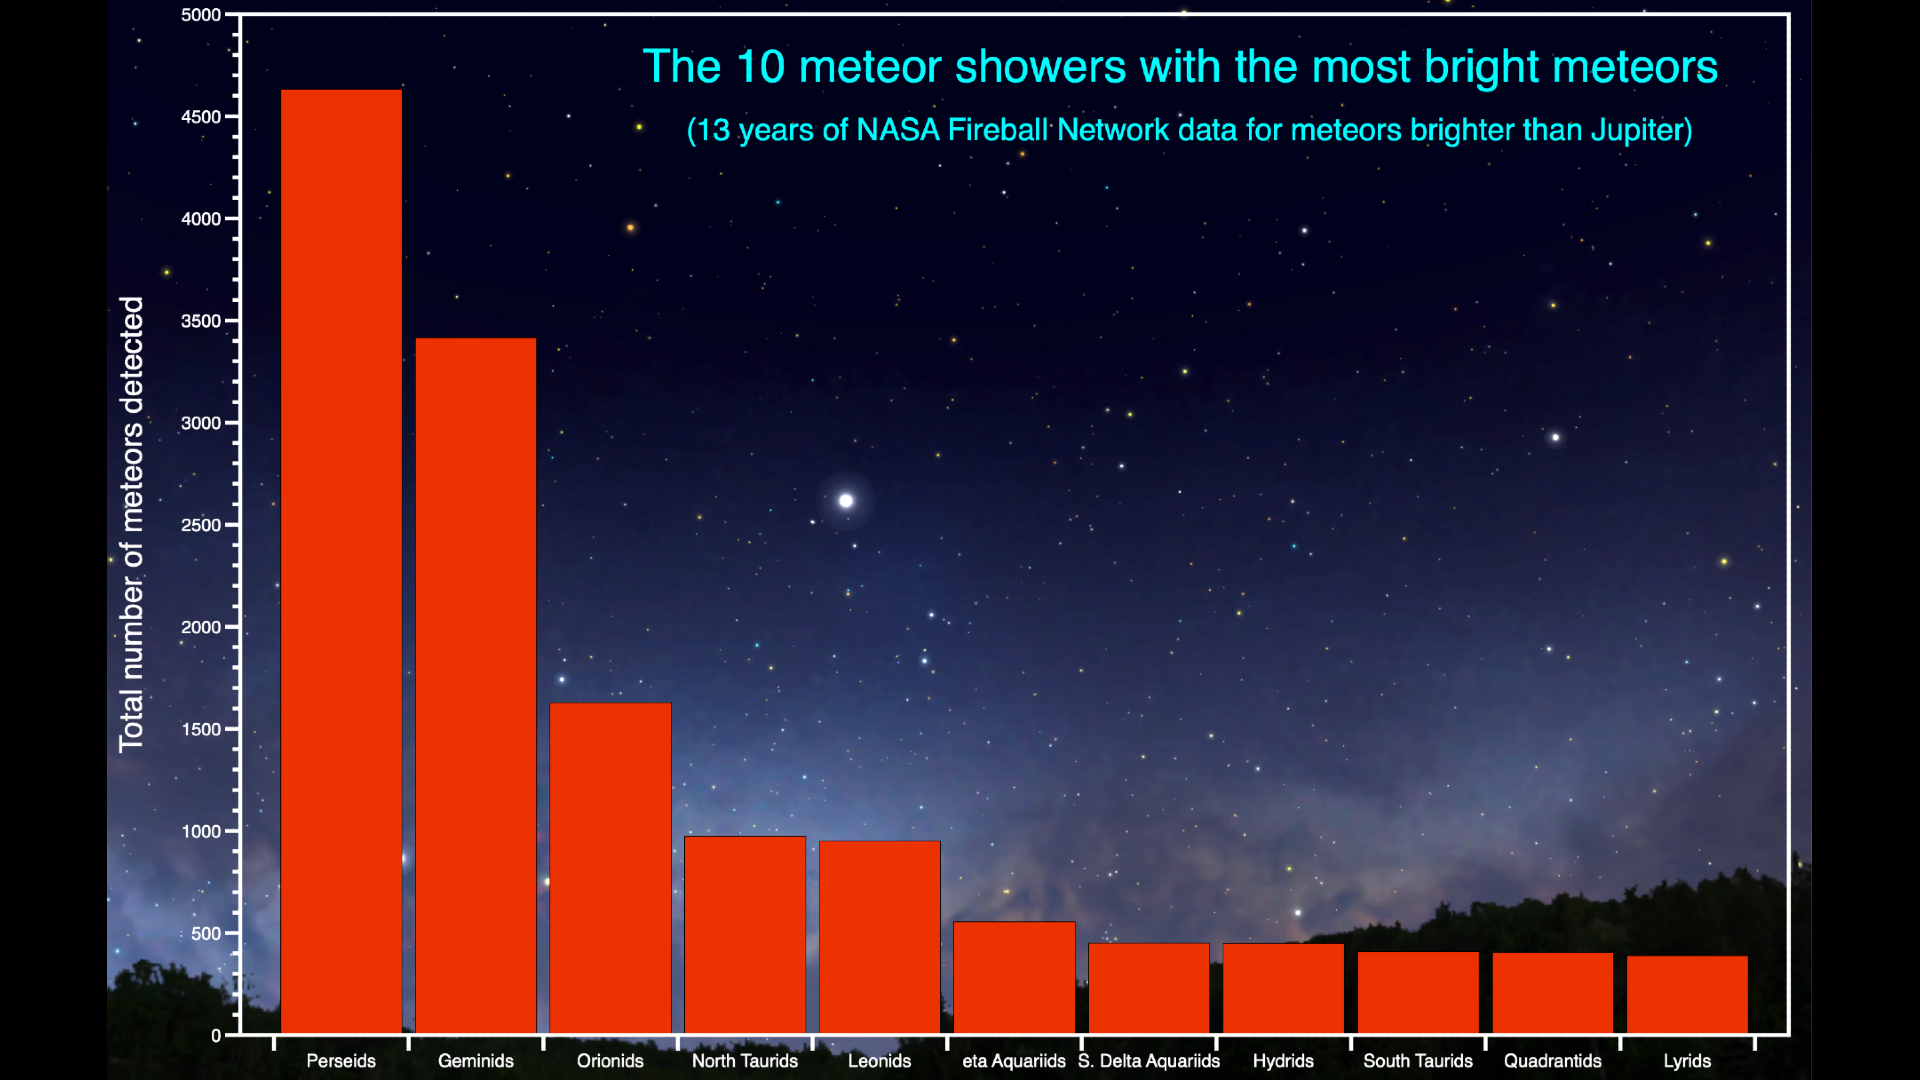 Ten meteor showers with the most bright meteors. The graph incorporates bright meteors observed from the beginning of 2009 to the end of 2021 by the NASA Meteoroid Environment Office.